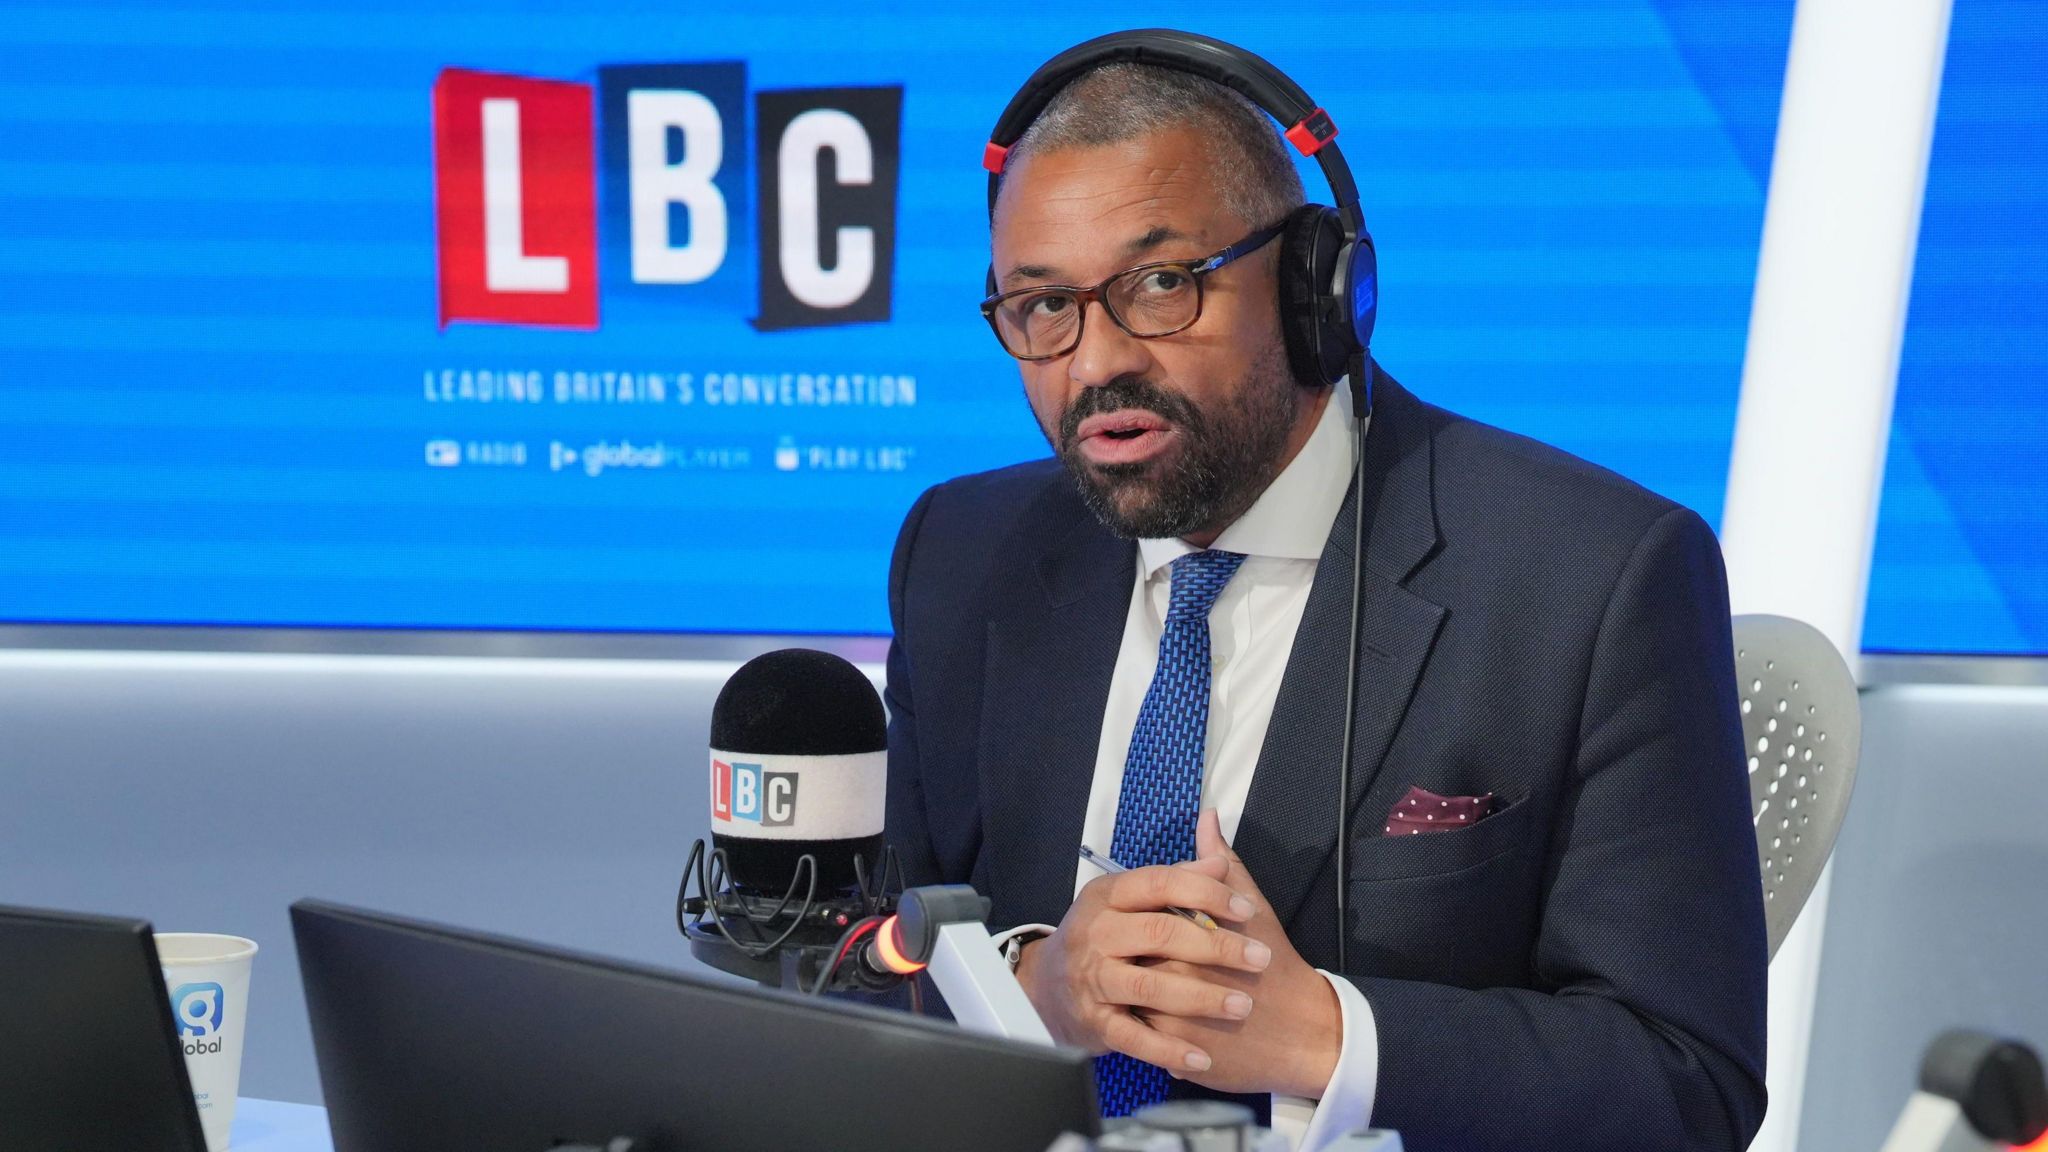 Home Secretary James Cleverly takes part in a debate on LBC